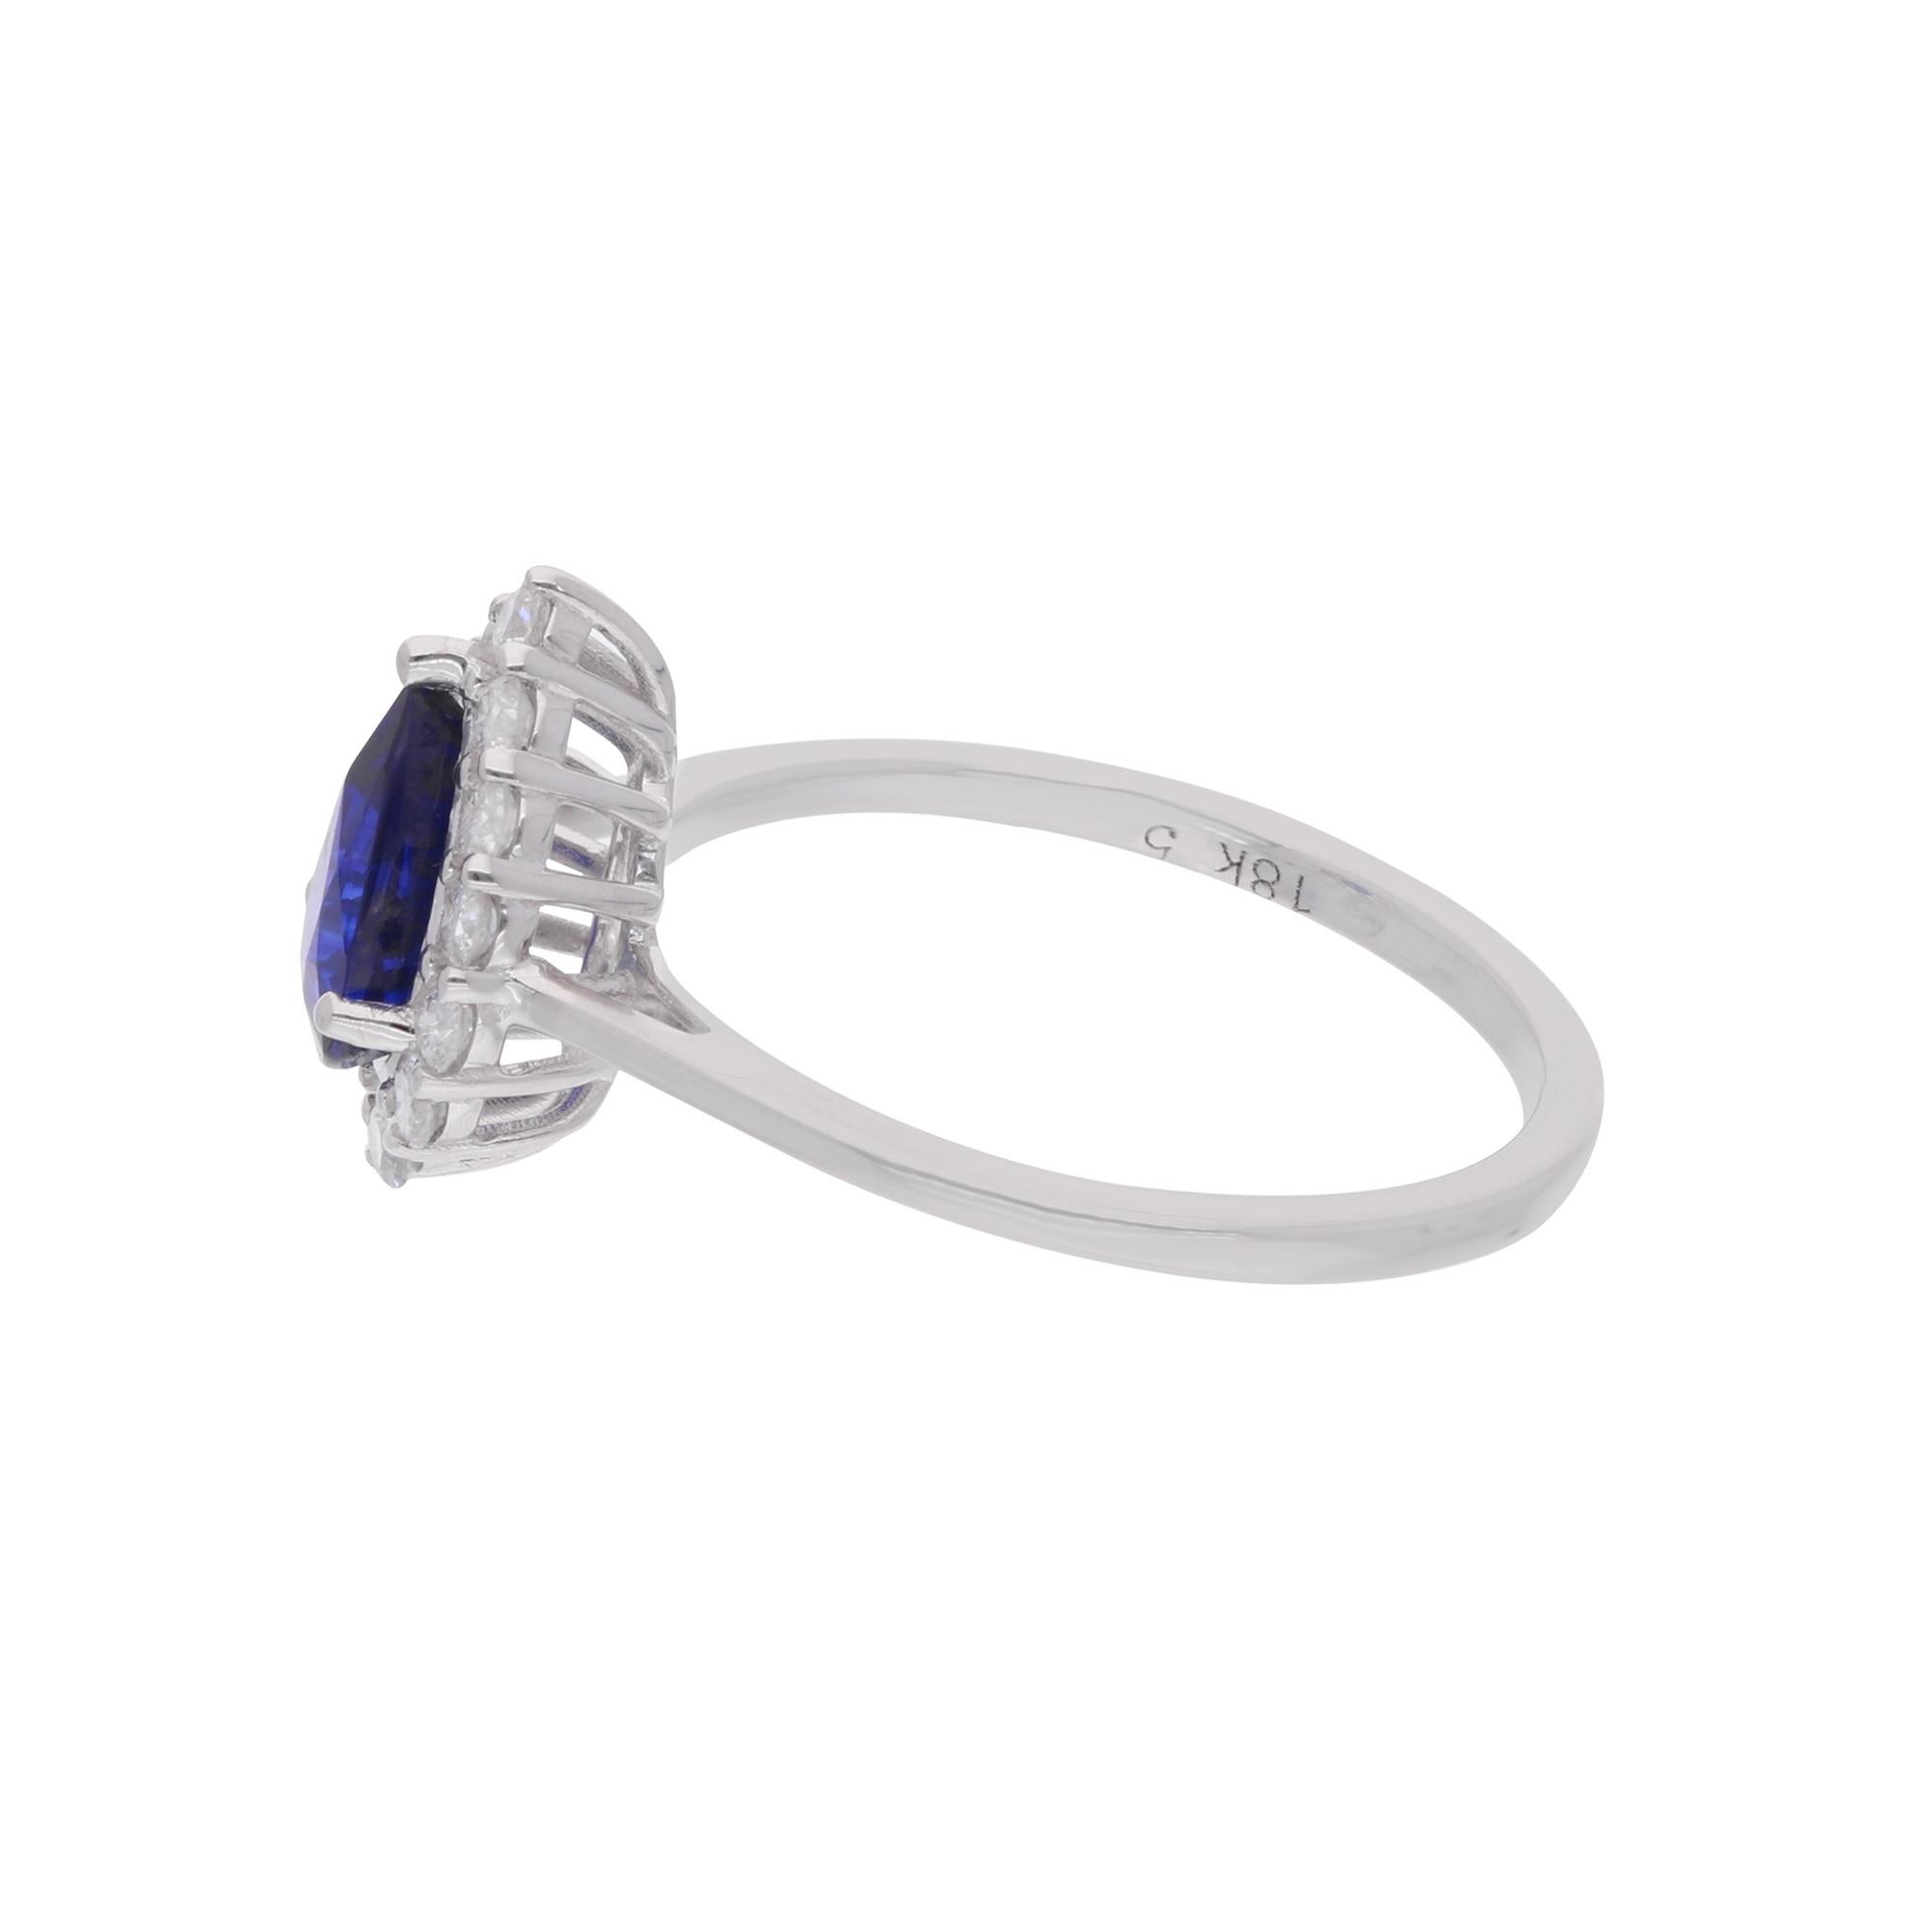 Experience the epitome of elegance and sophistication with this exquisite handmade ring, featuring a stunning pear-shaped blue sapphire gemstone, complemented by sparkling diamonds and set in luxurious 18 karat white gold. This piece of fine jewelry